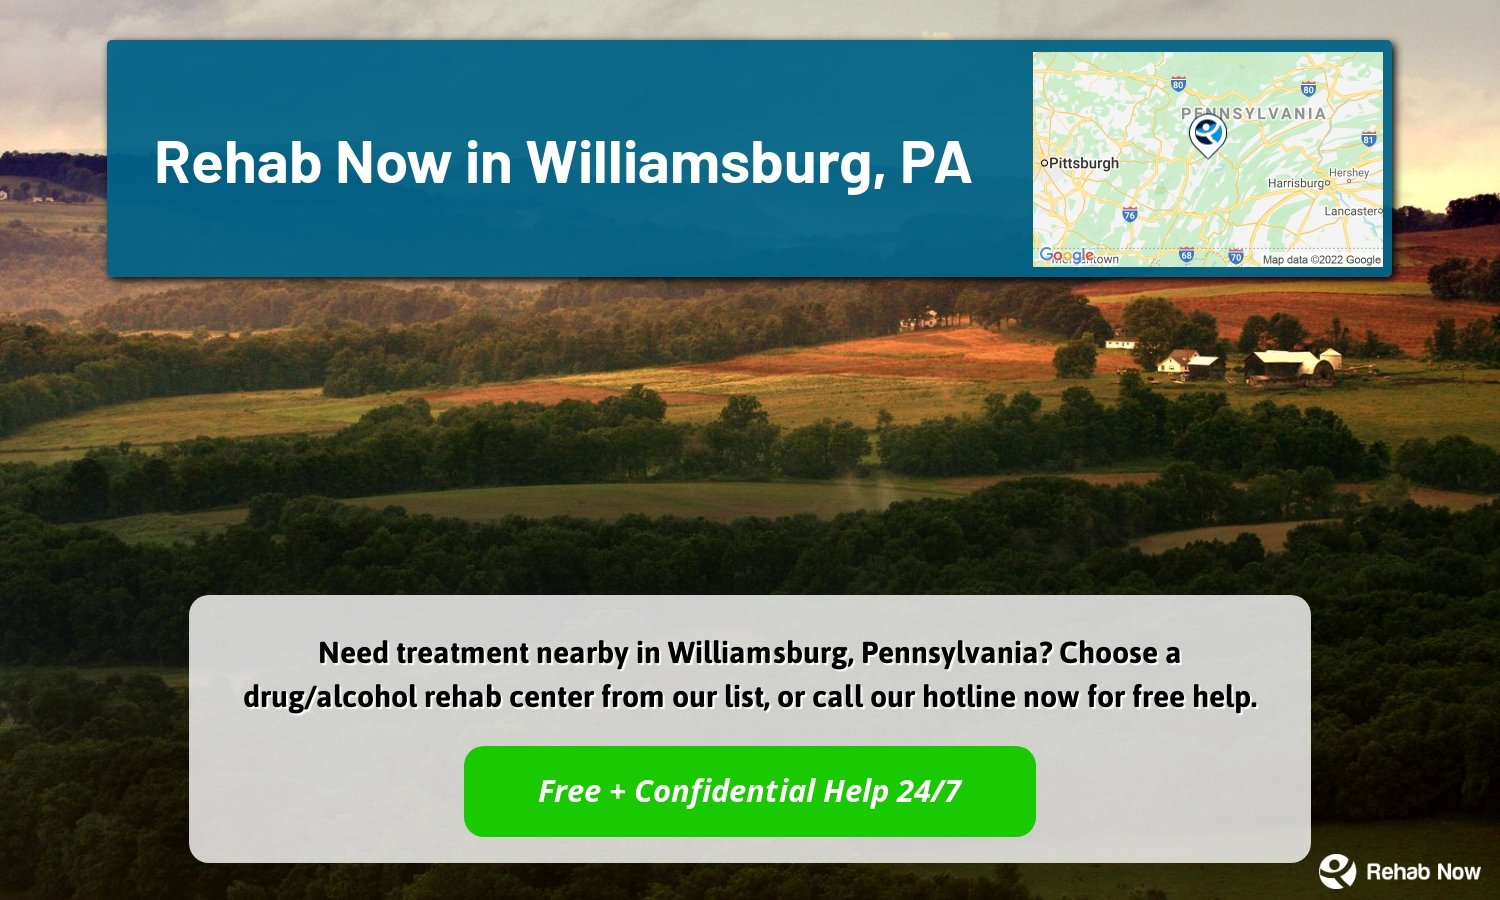 Need treatment nearby in Williamsburg, Pennsylvania? Choose a drug/alcohol rehab center from our list, or call our hotline now for free help.